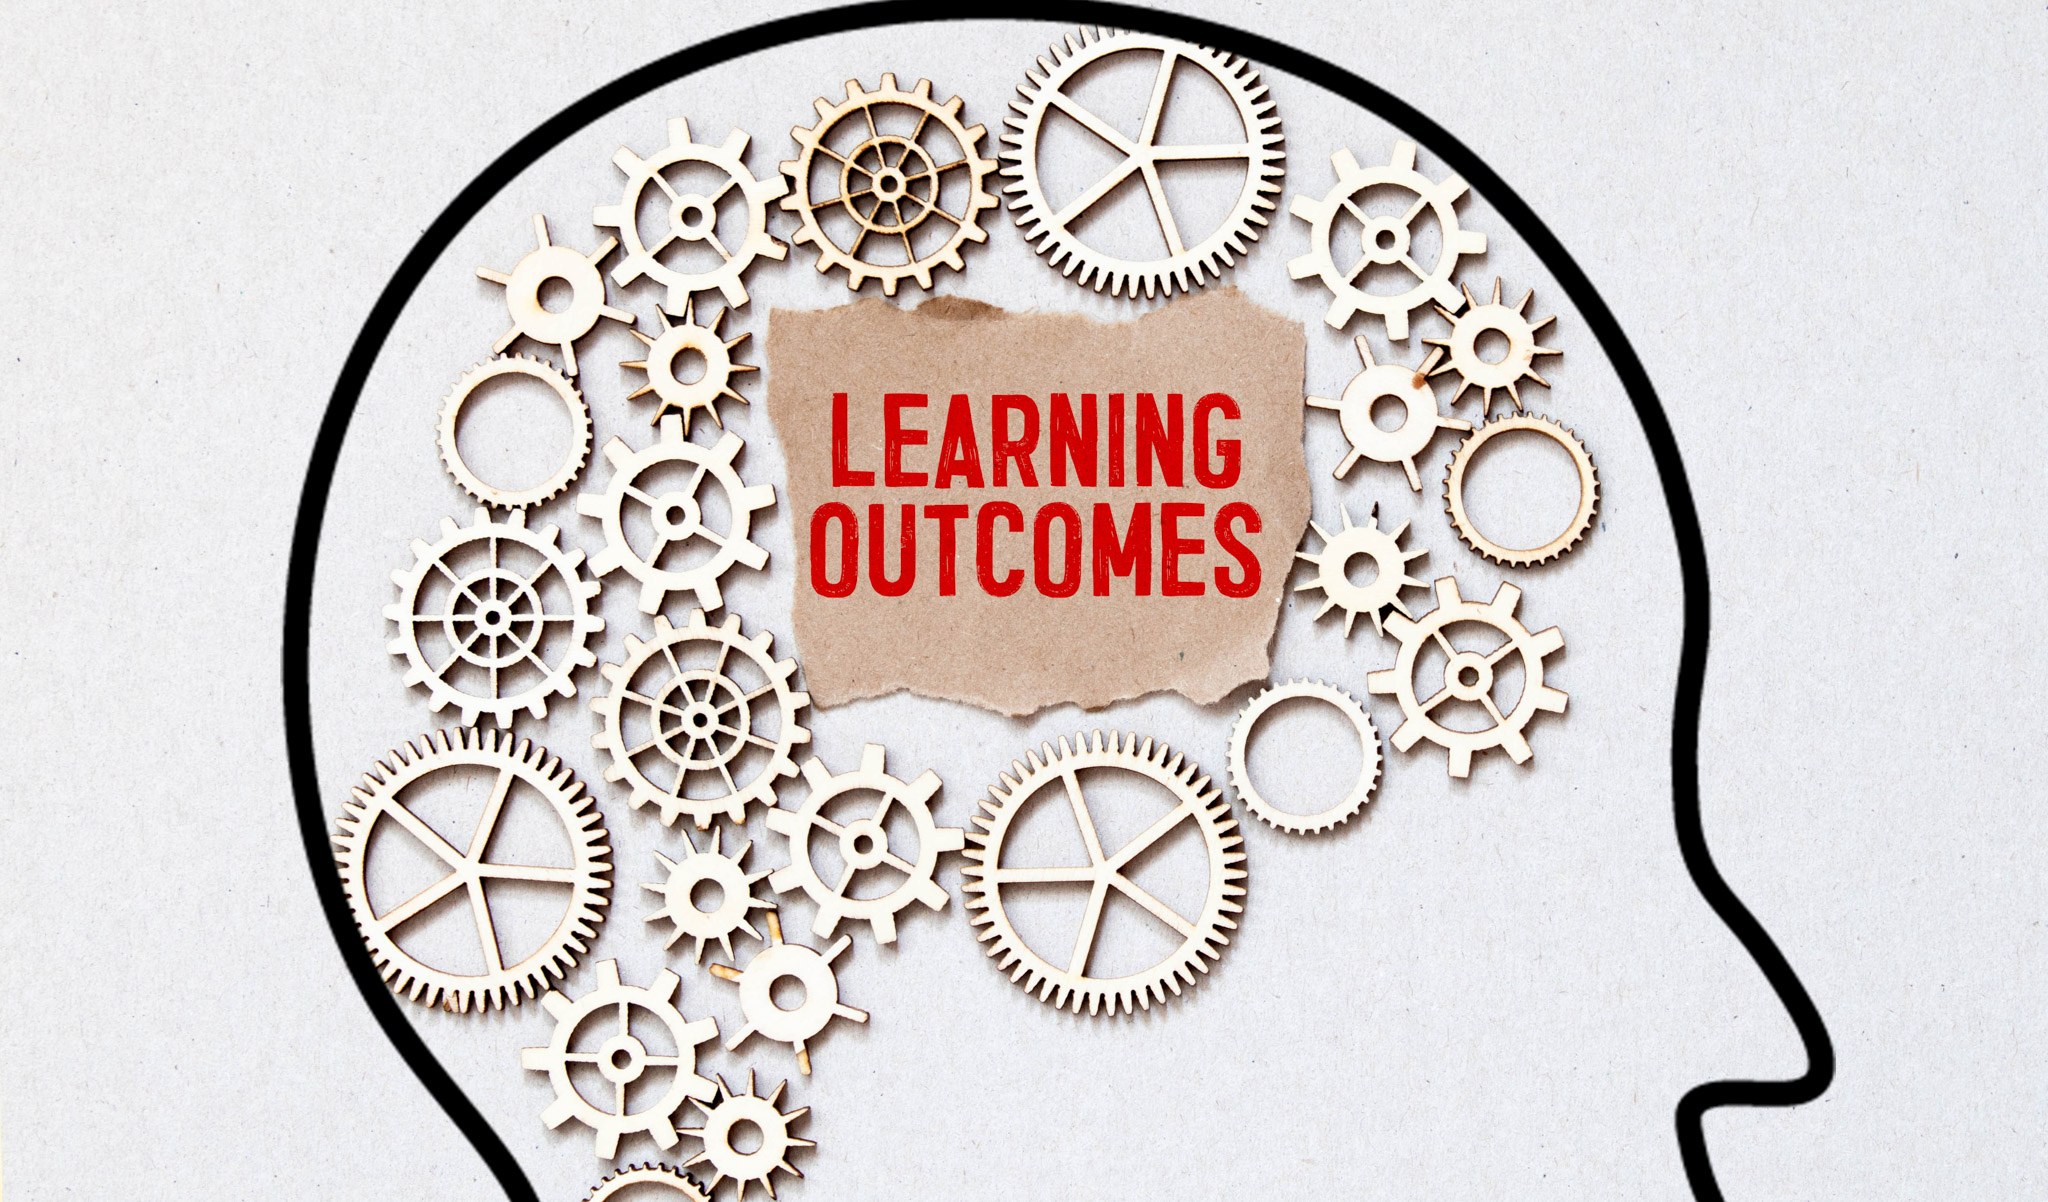 The words 'learning outcomes' on an outline of a head